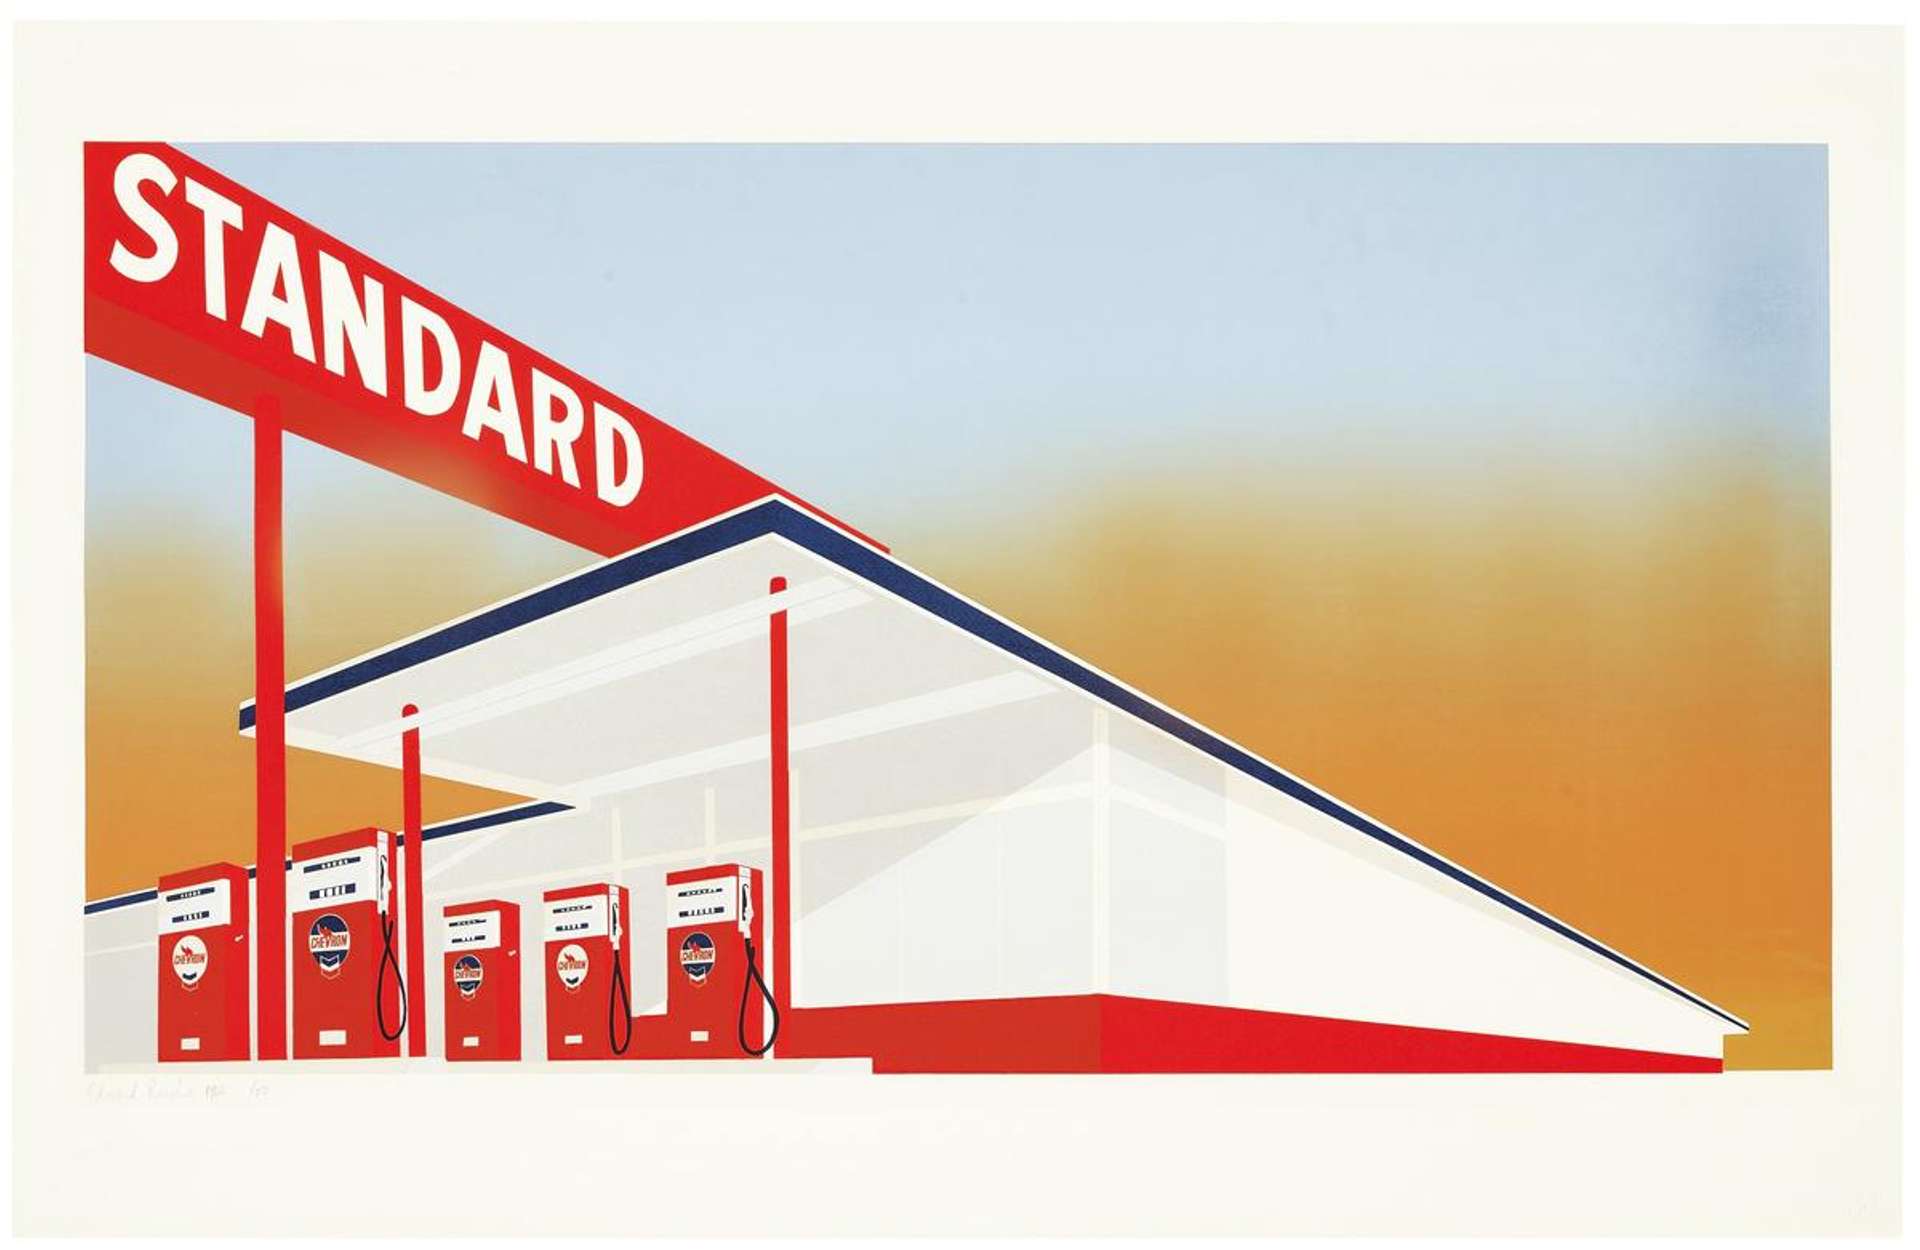 Pop art style print of a gas station named 'standard' in reds and oranges